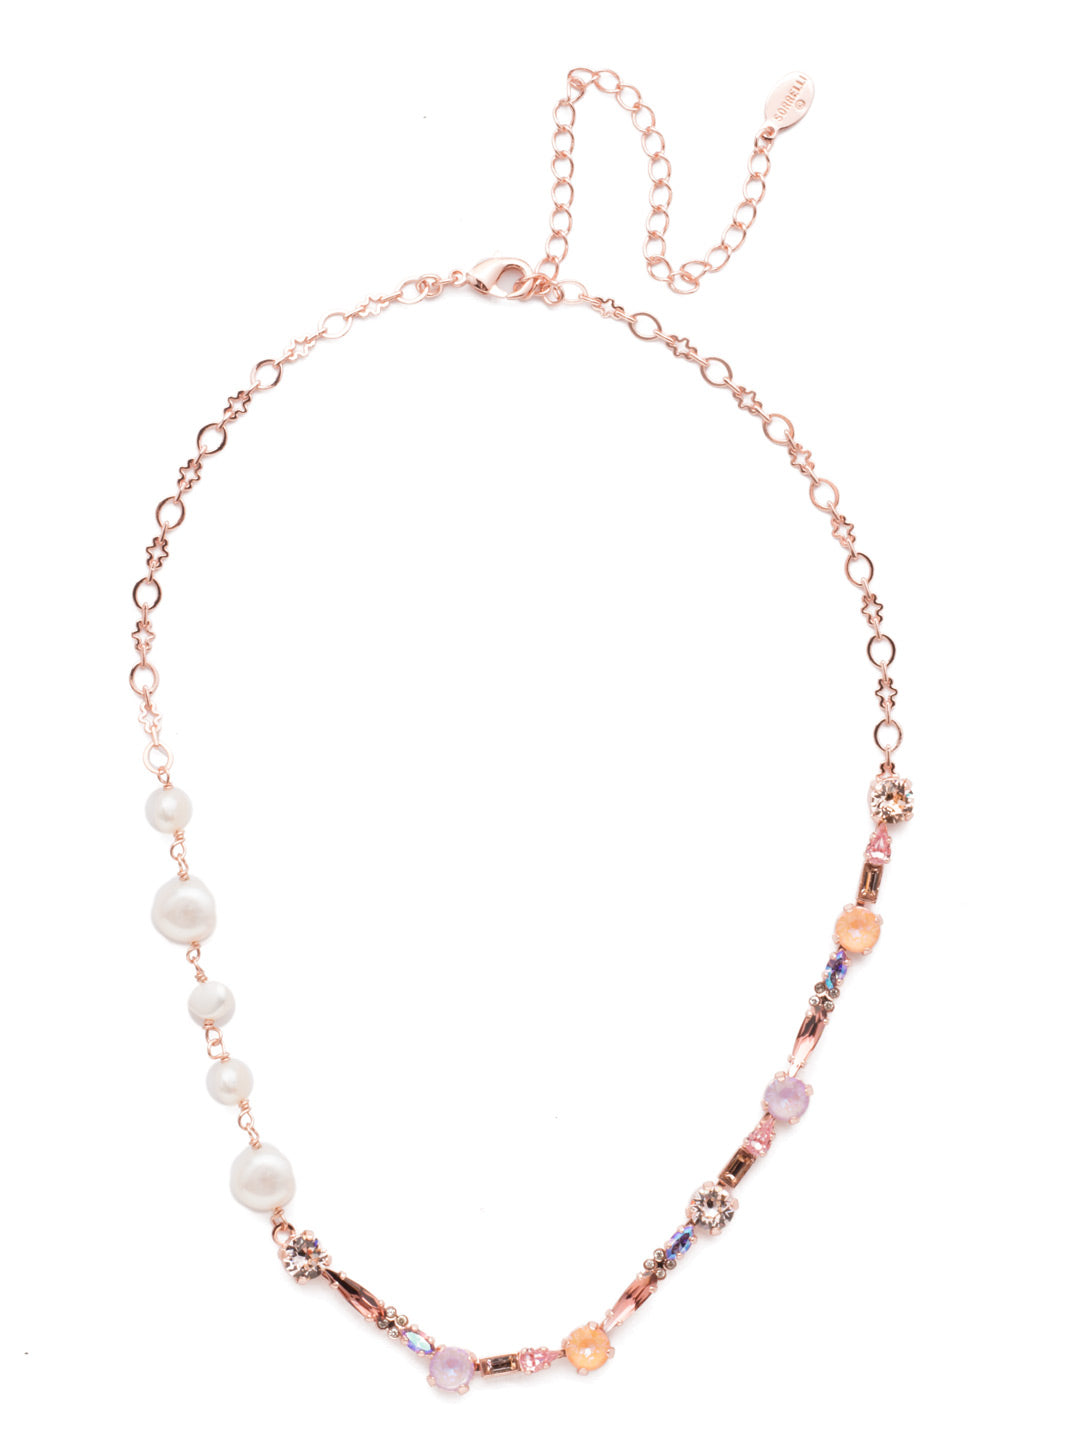 Oleana Tennis Necklace - NES18RGLVP - <p>The Oleana Tennis Necklace is the perfect piece for the person who loves both classic pearls and sparkling crystals, showcased in all shapes and sizes. From Sorrelli's Lavender Peach collection in our Rose Gold-tone finish.</p>